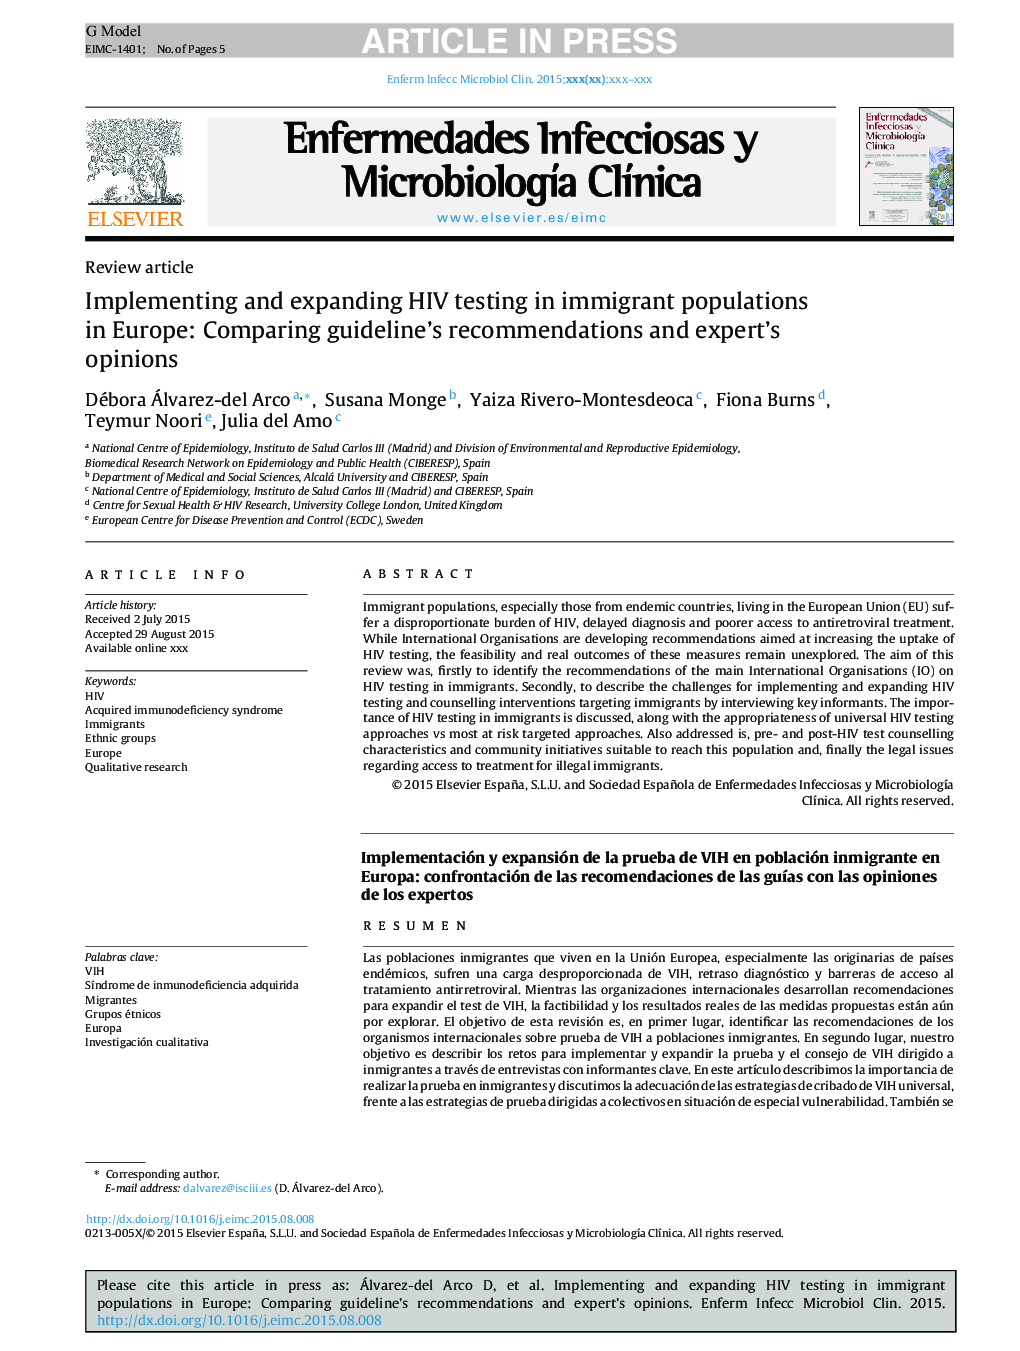 Implementing and expanding HIV testing in immigrant populations in Europe: Comparing guideline's recommendations and expert's opinions